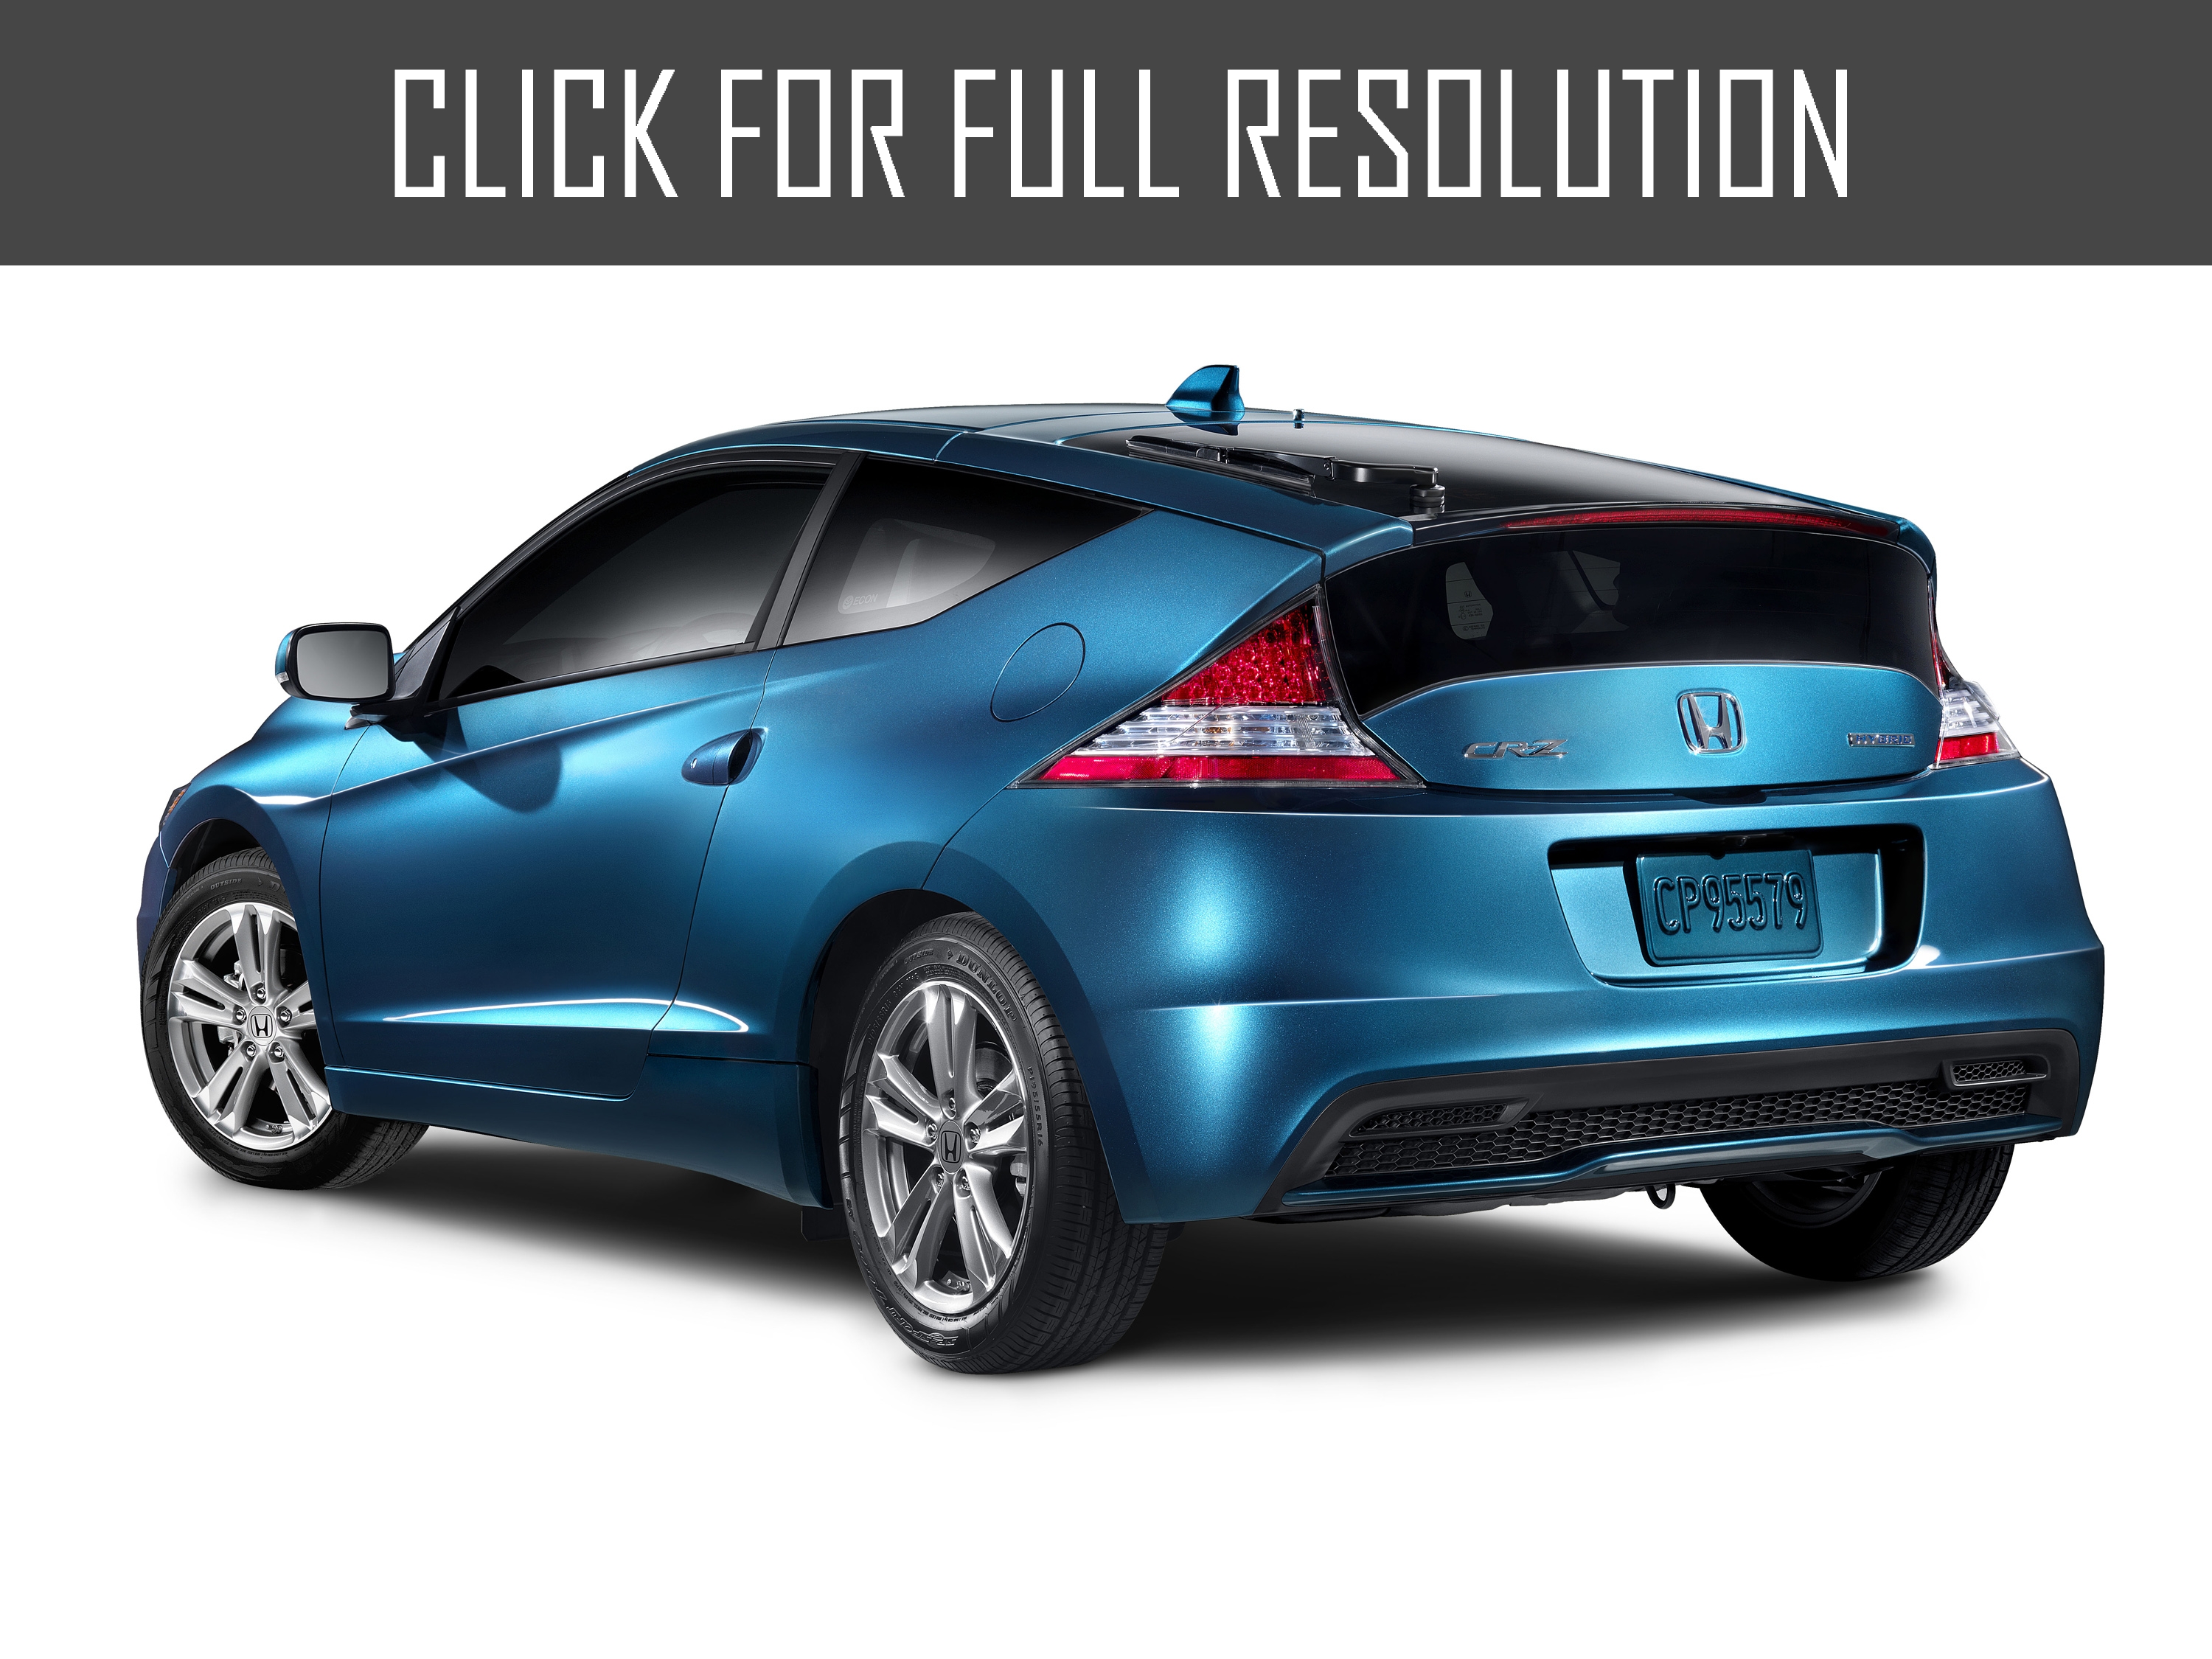 2015 Honda Crx - news, reviews, msrp, ratings with amazing 